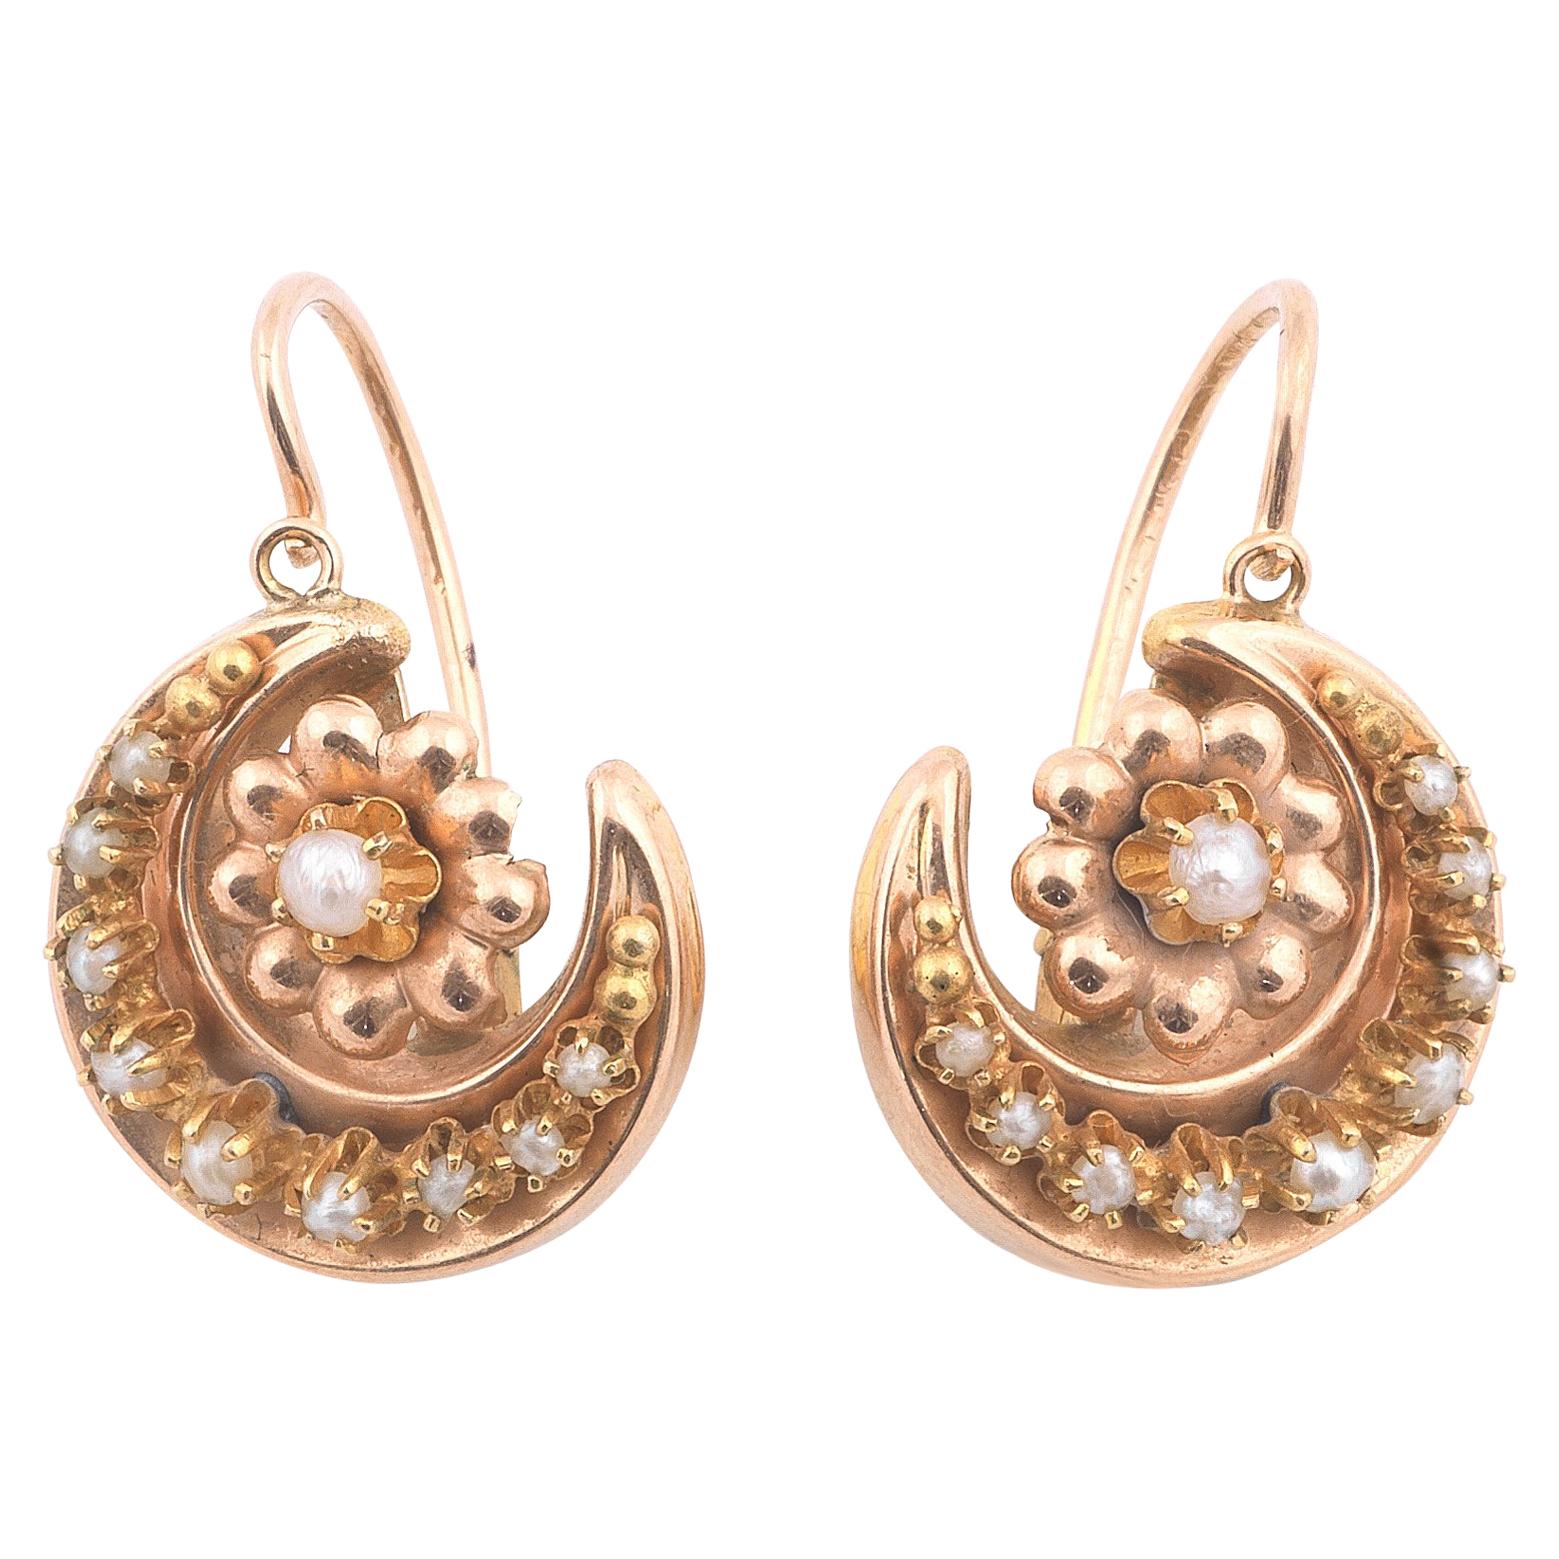 Antique Gold and Pearl Earrings